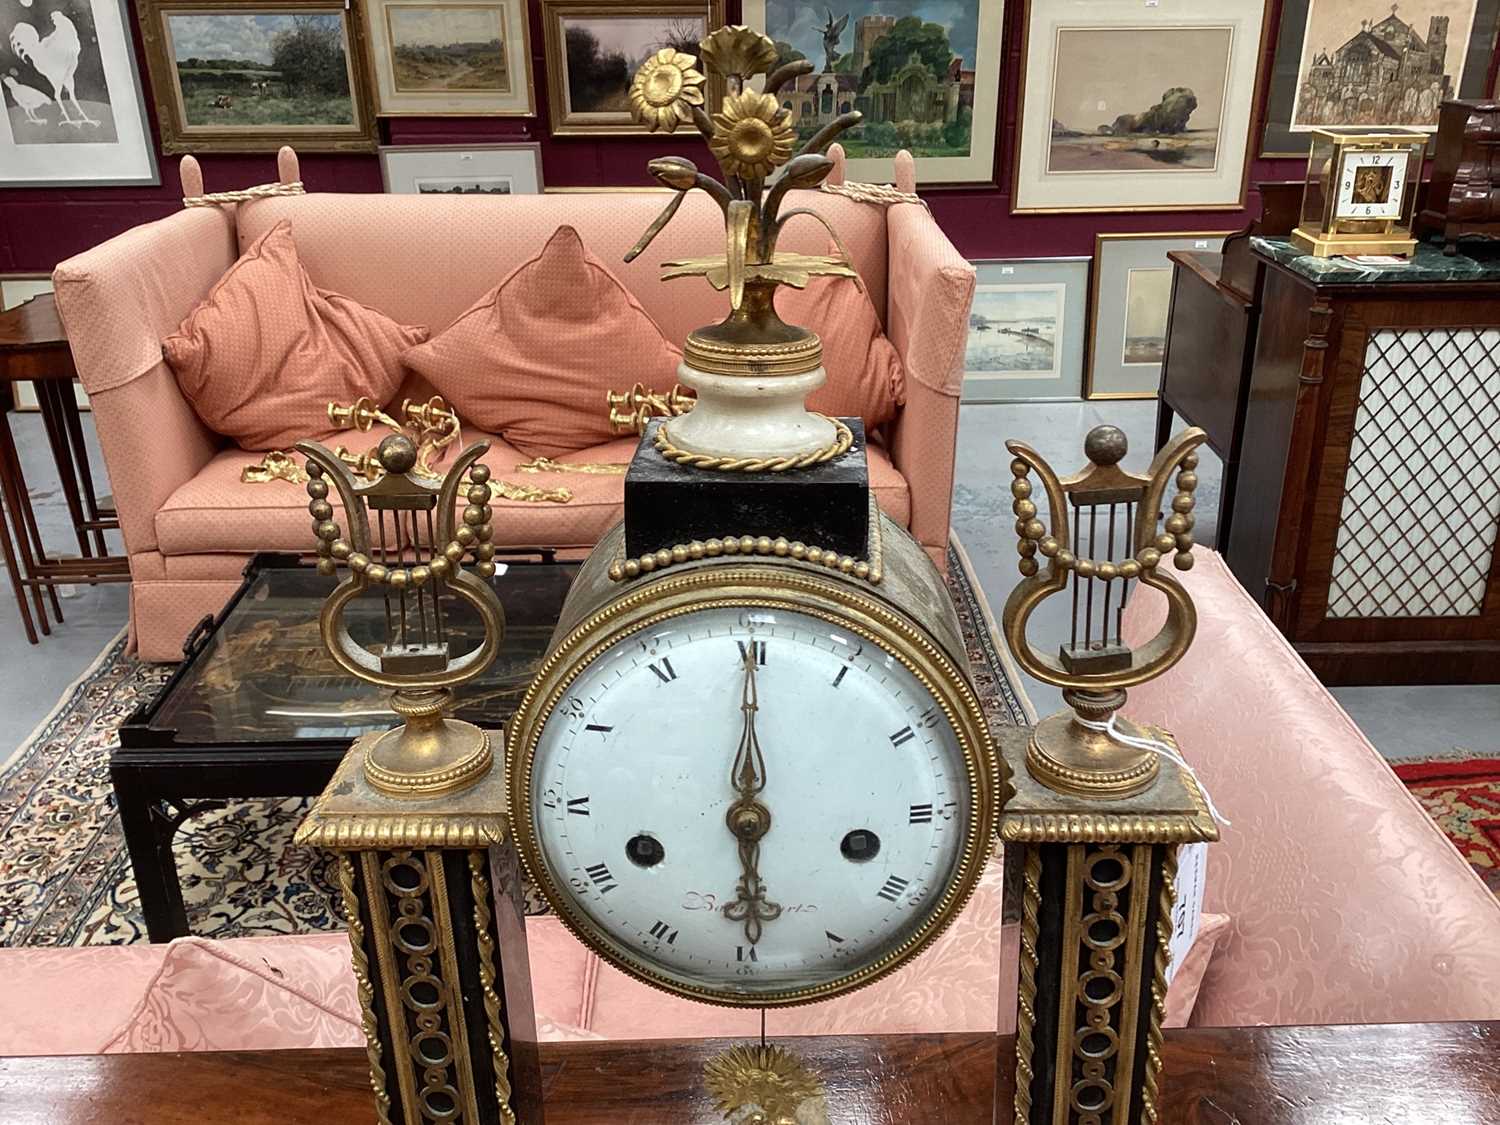 Early 19th century French Louis XVI-style marble and ormolu mantel clock - Image 6 of 8